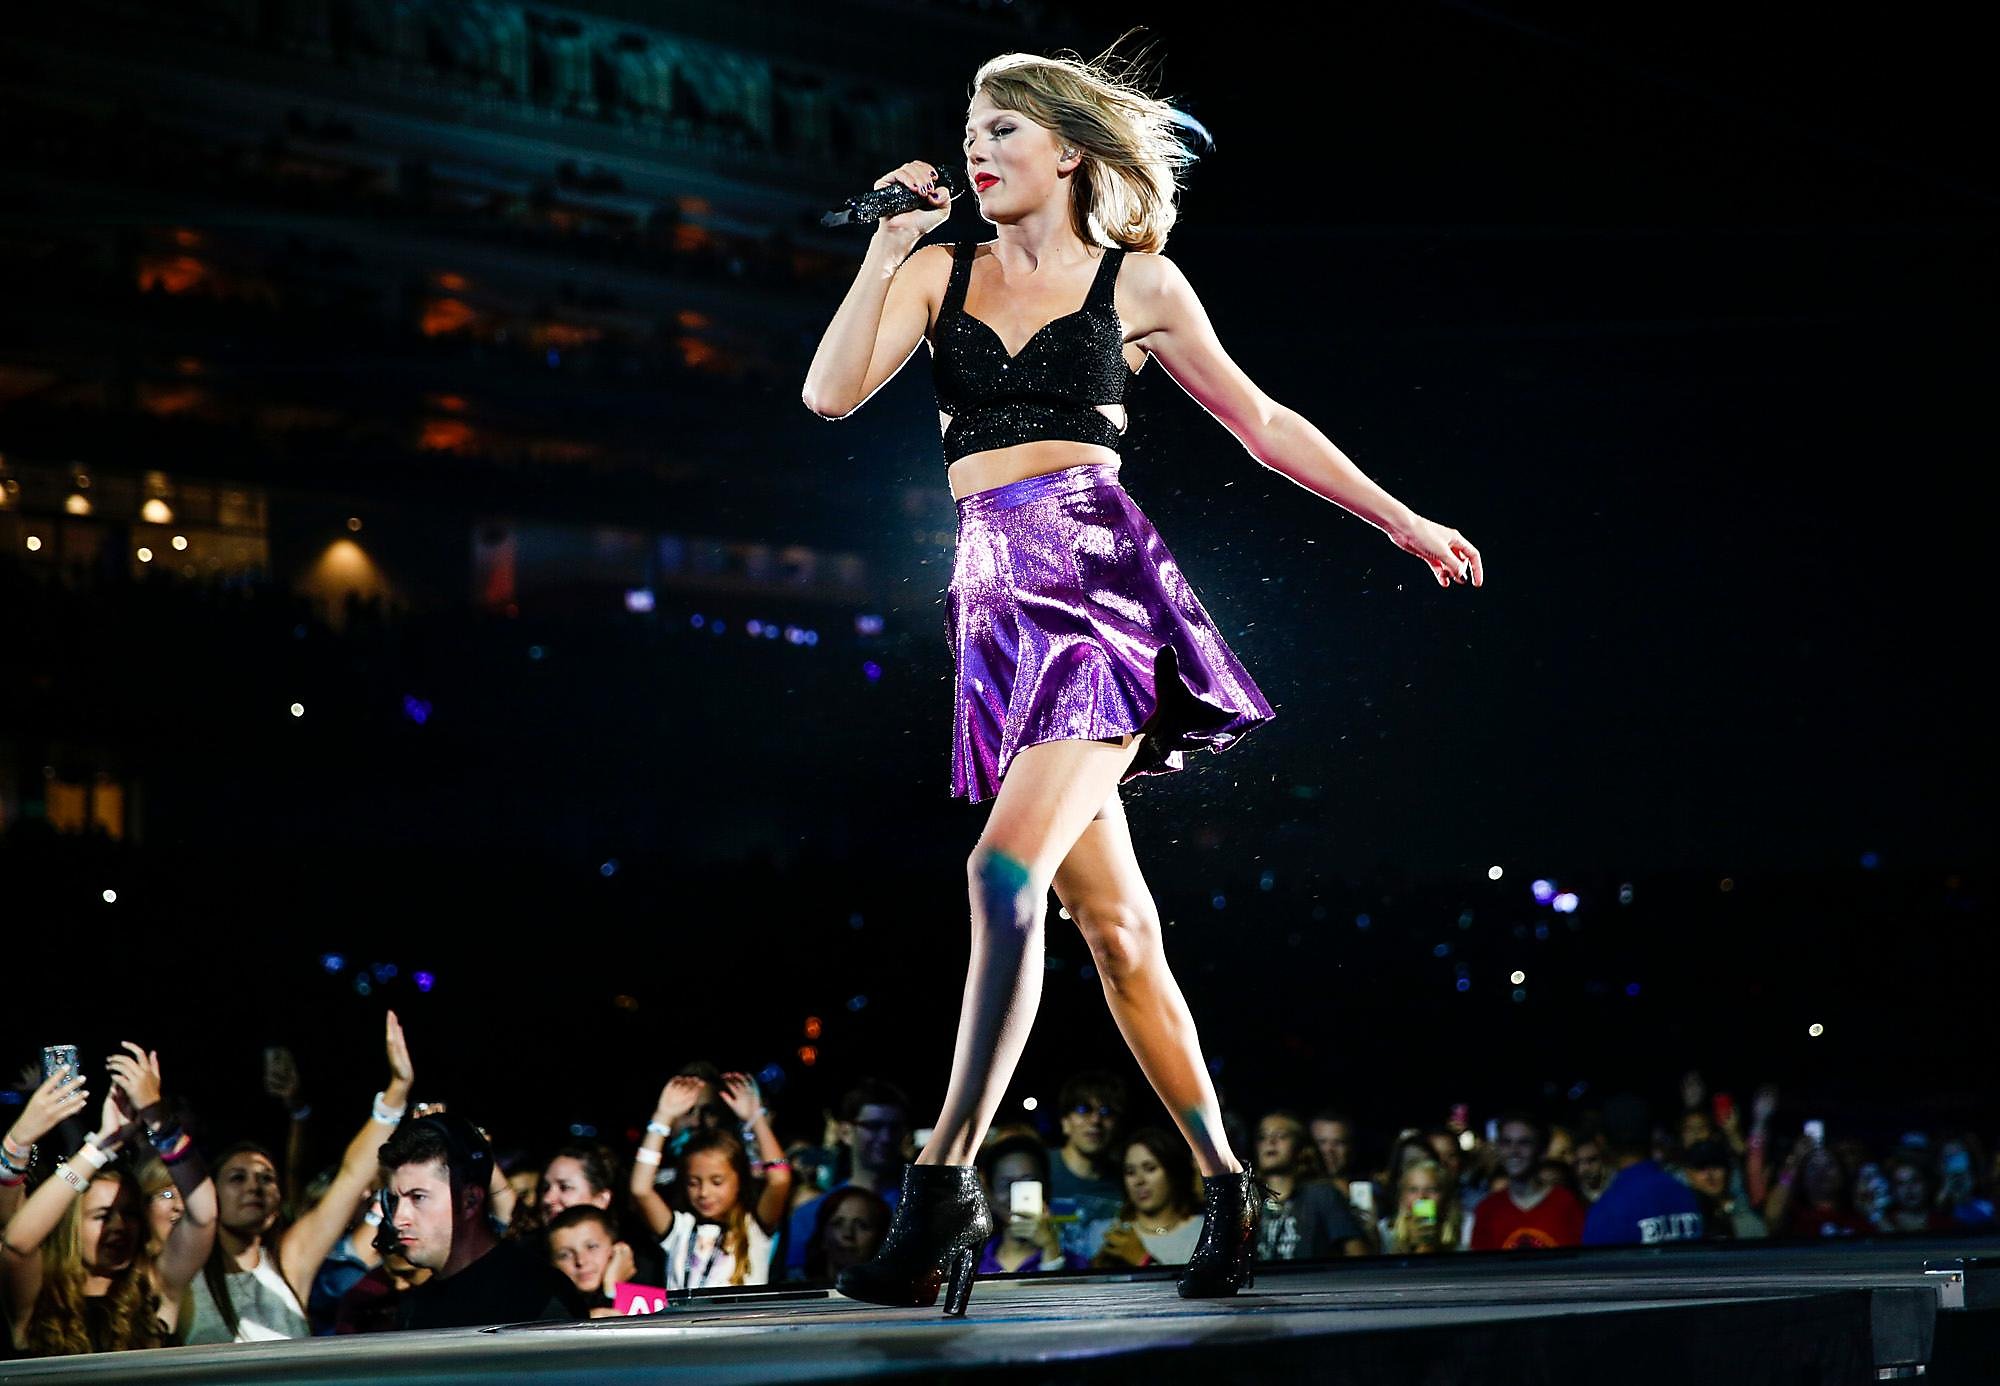 Taylor Swift announces tour dates, return to Levi’s Stadium in 2018 - SFChronicle.com2000 x 1386